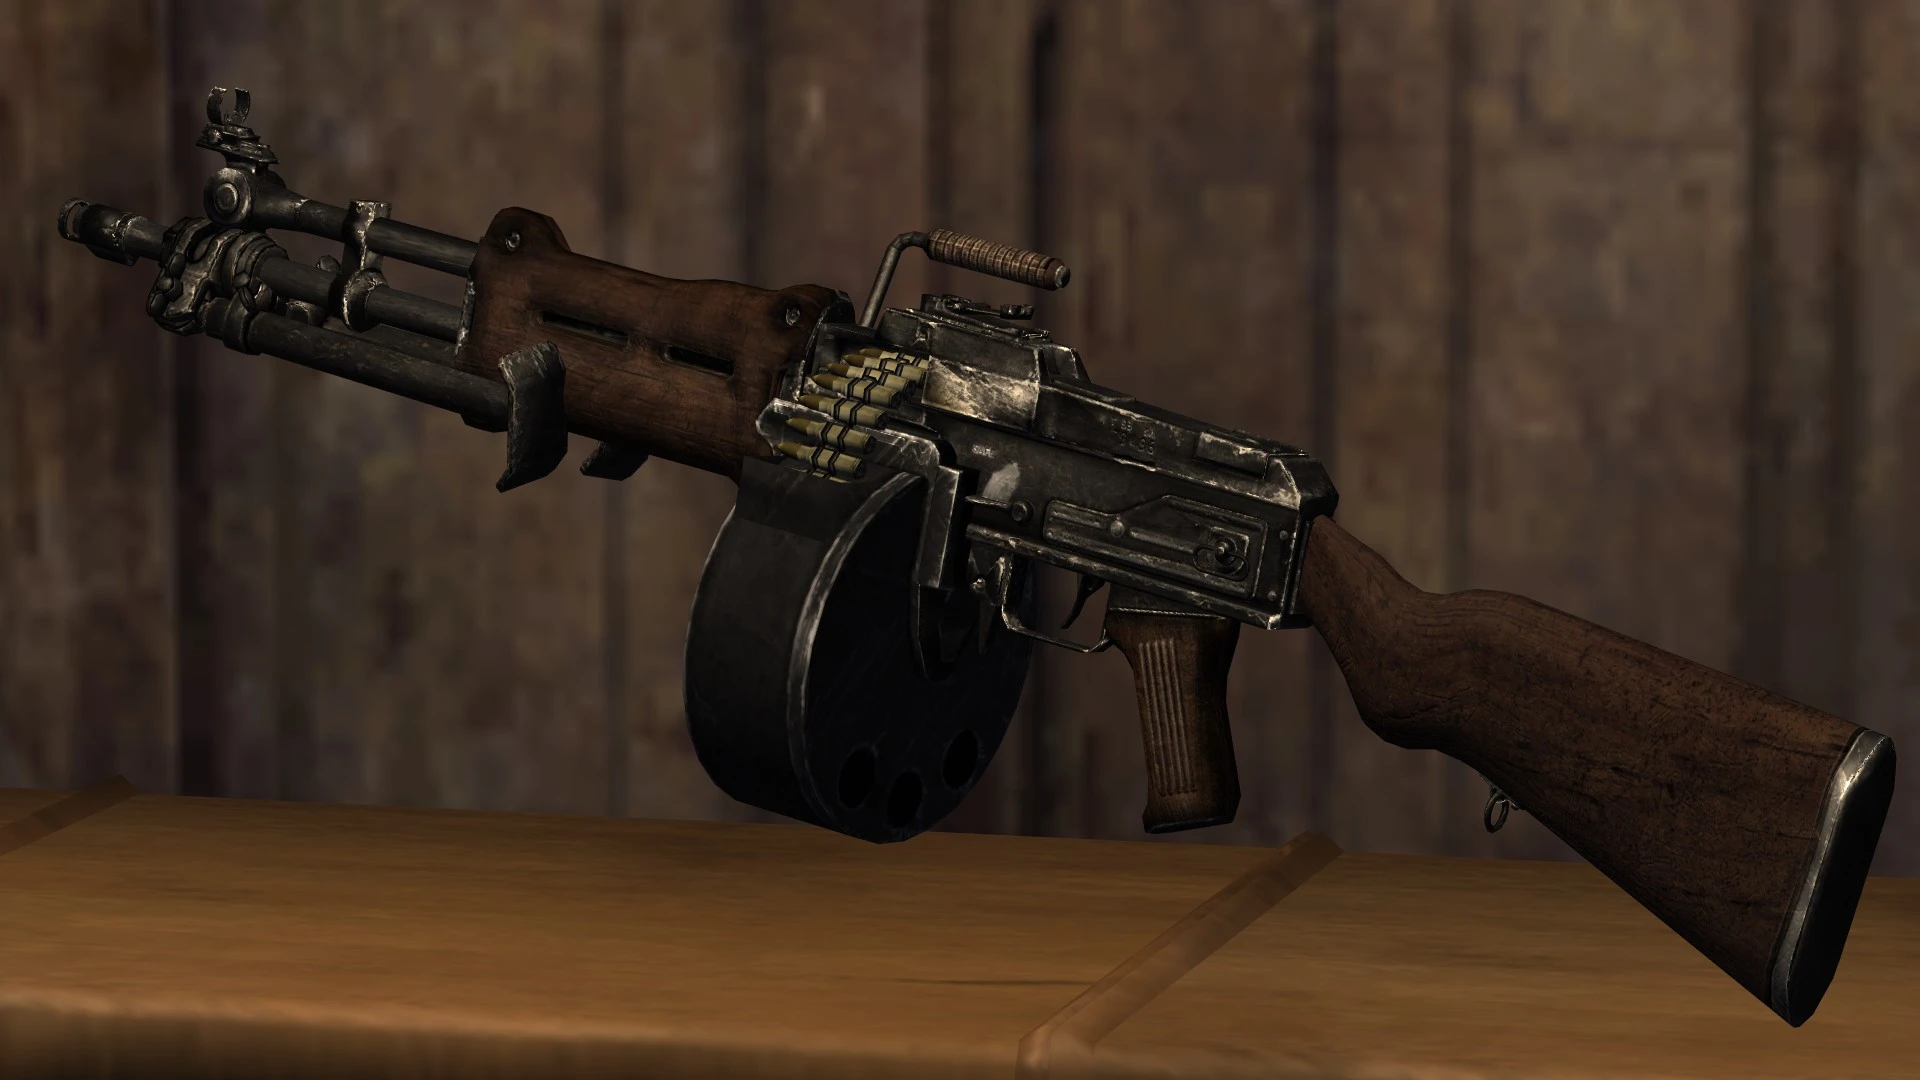 Fallout 4 handmade rifle in commonwealth фото 81